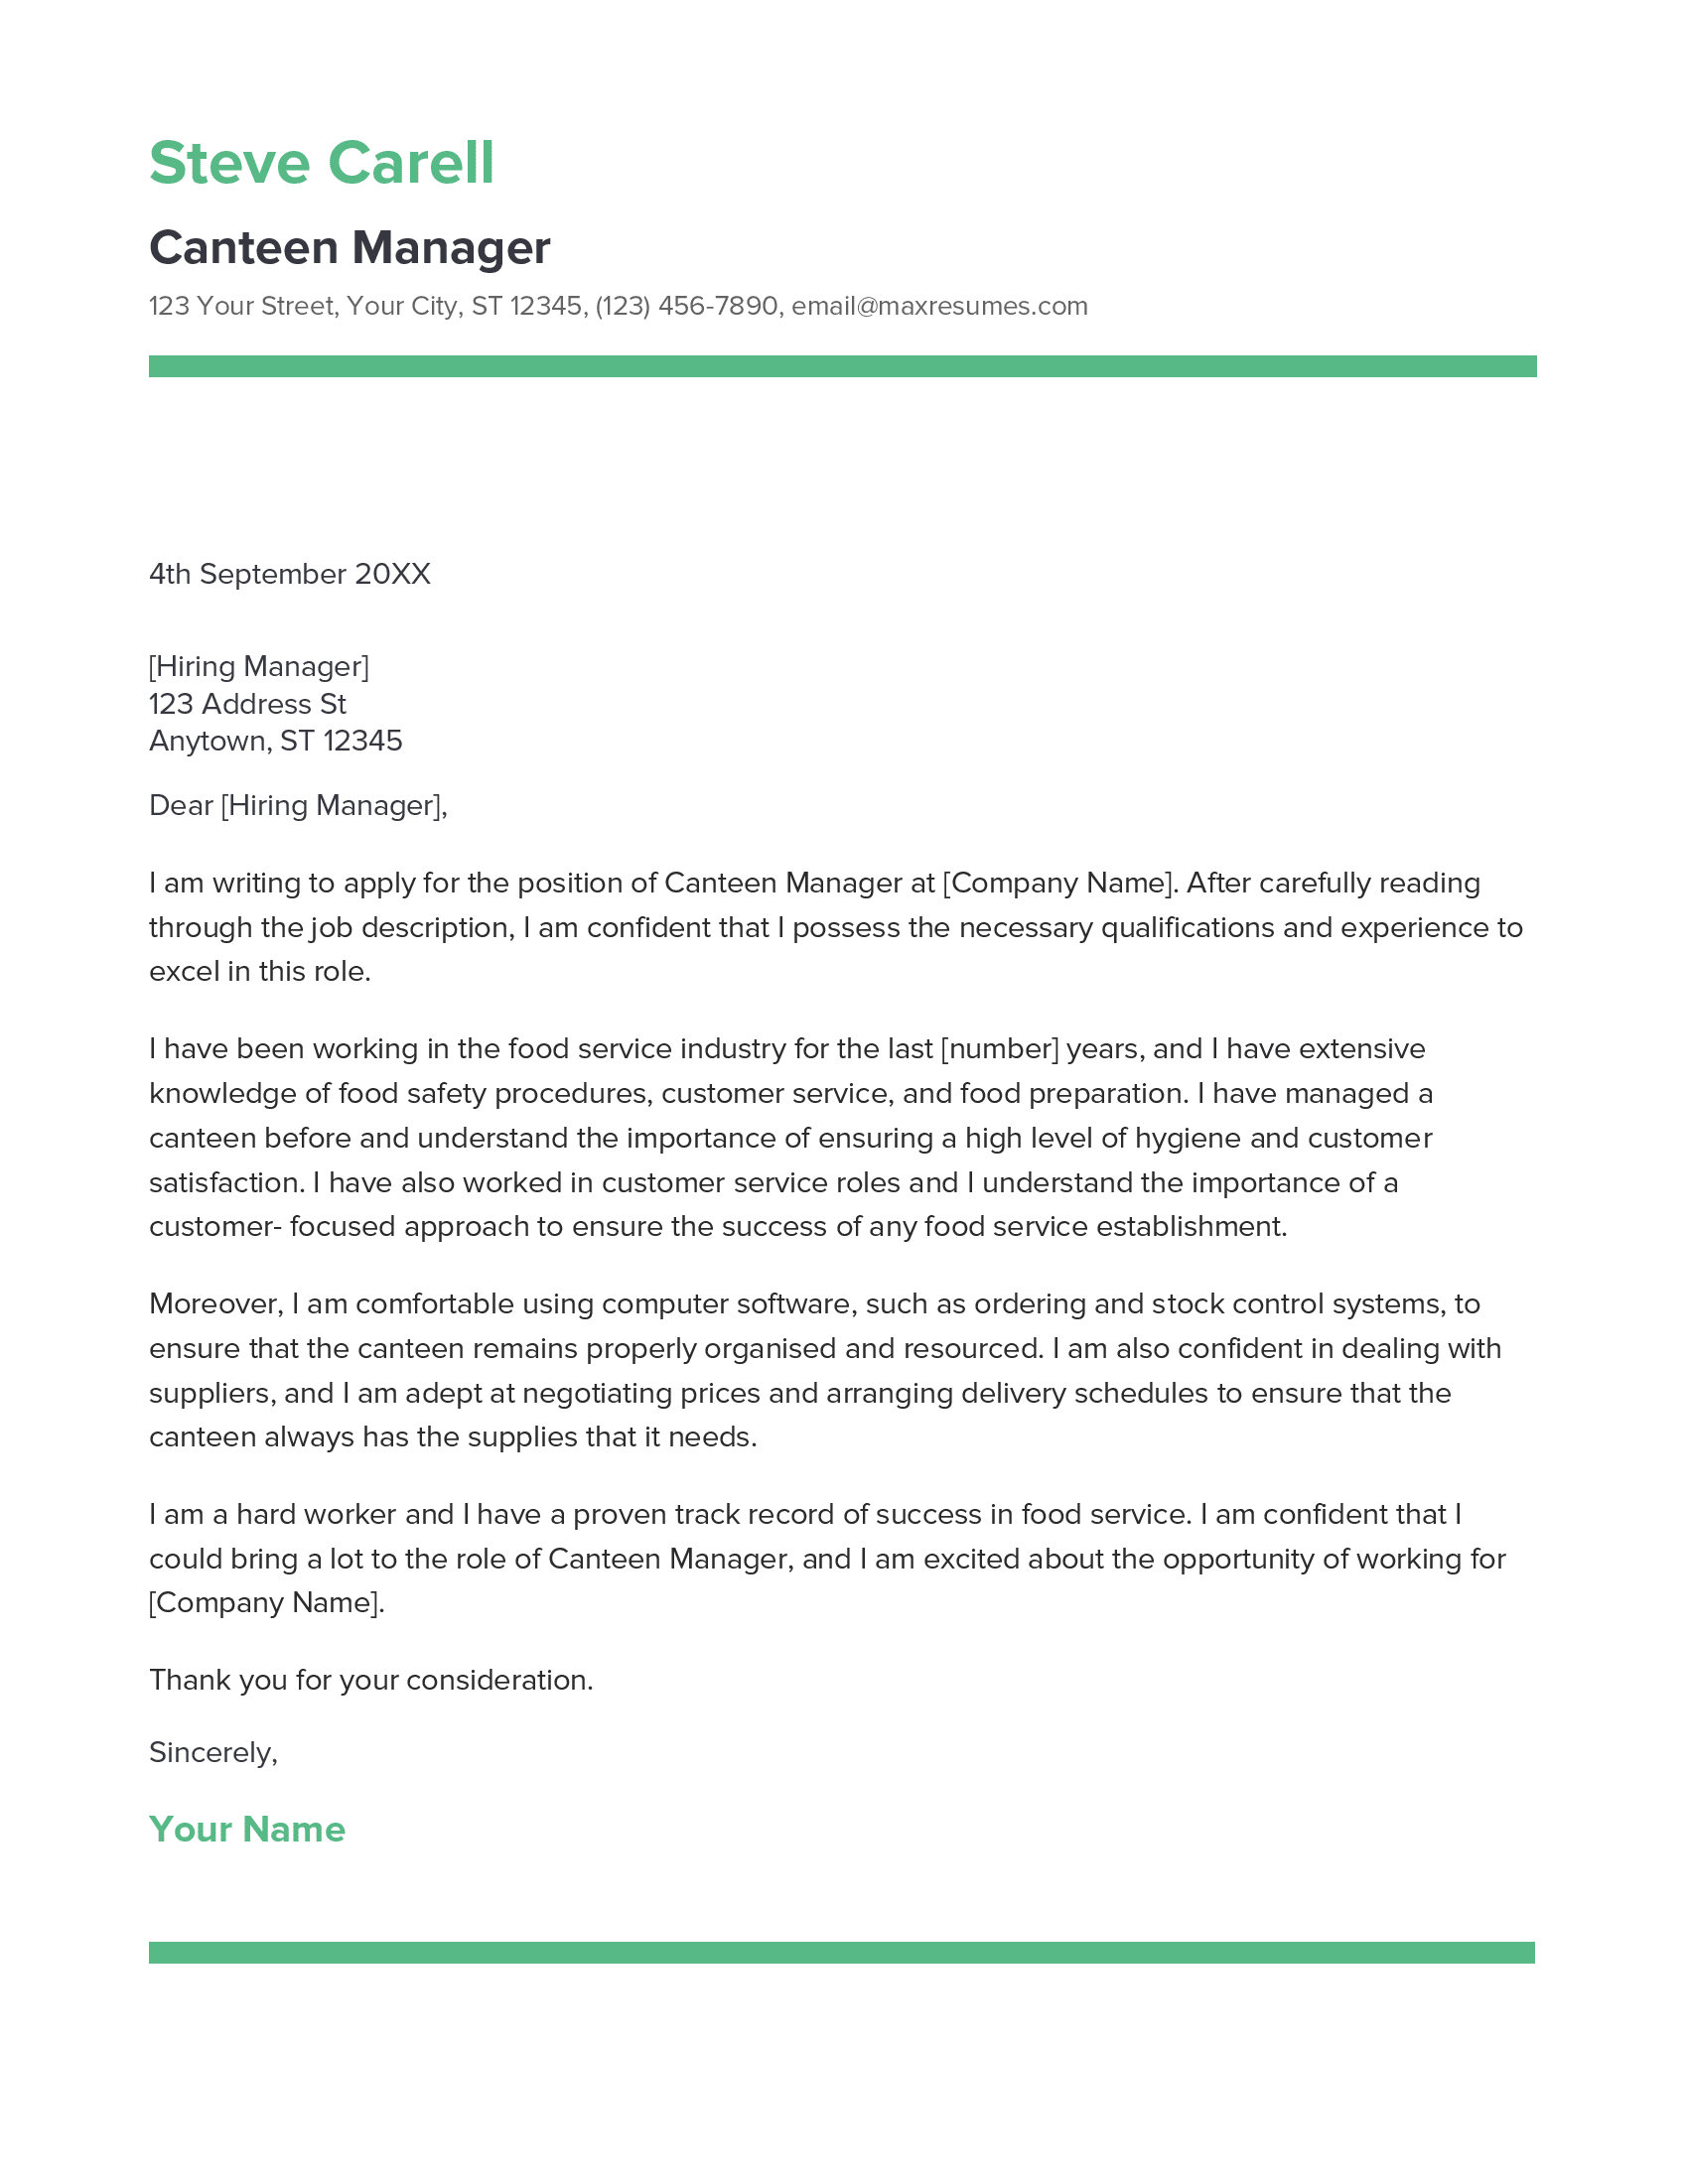 Canteen Manager Cover Letter Example